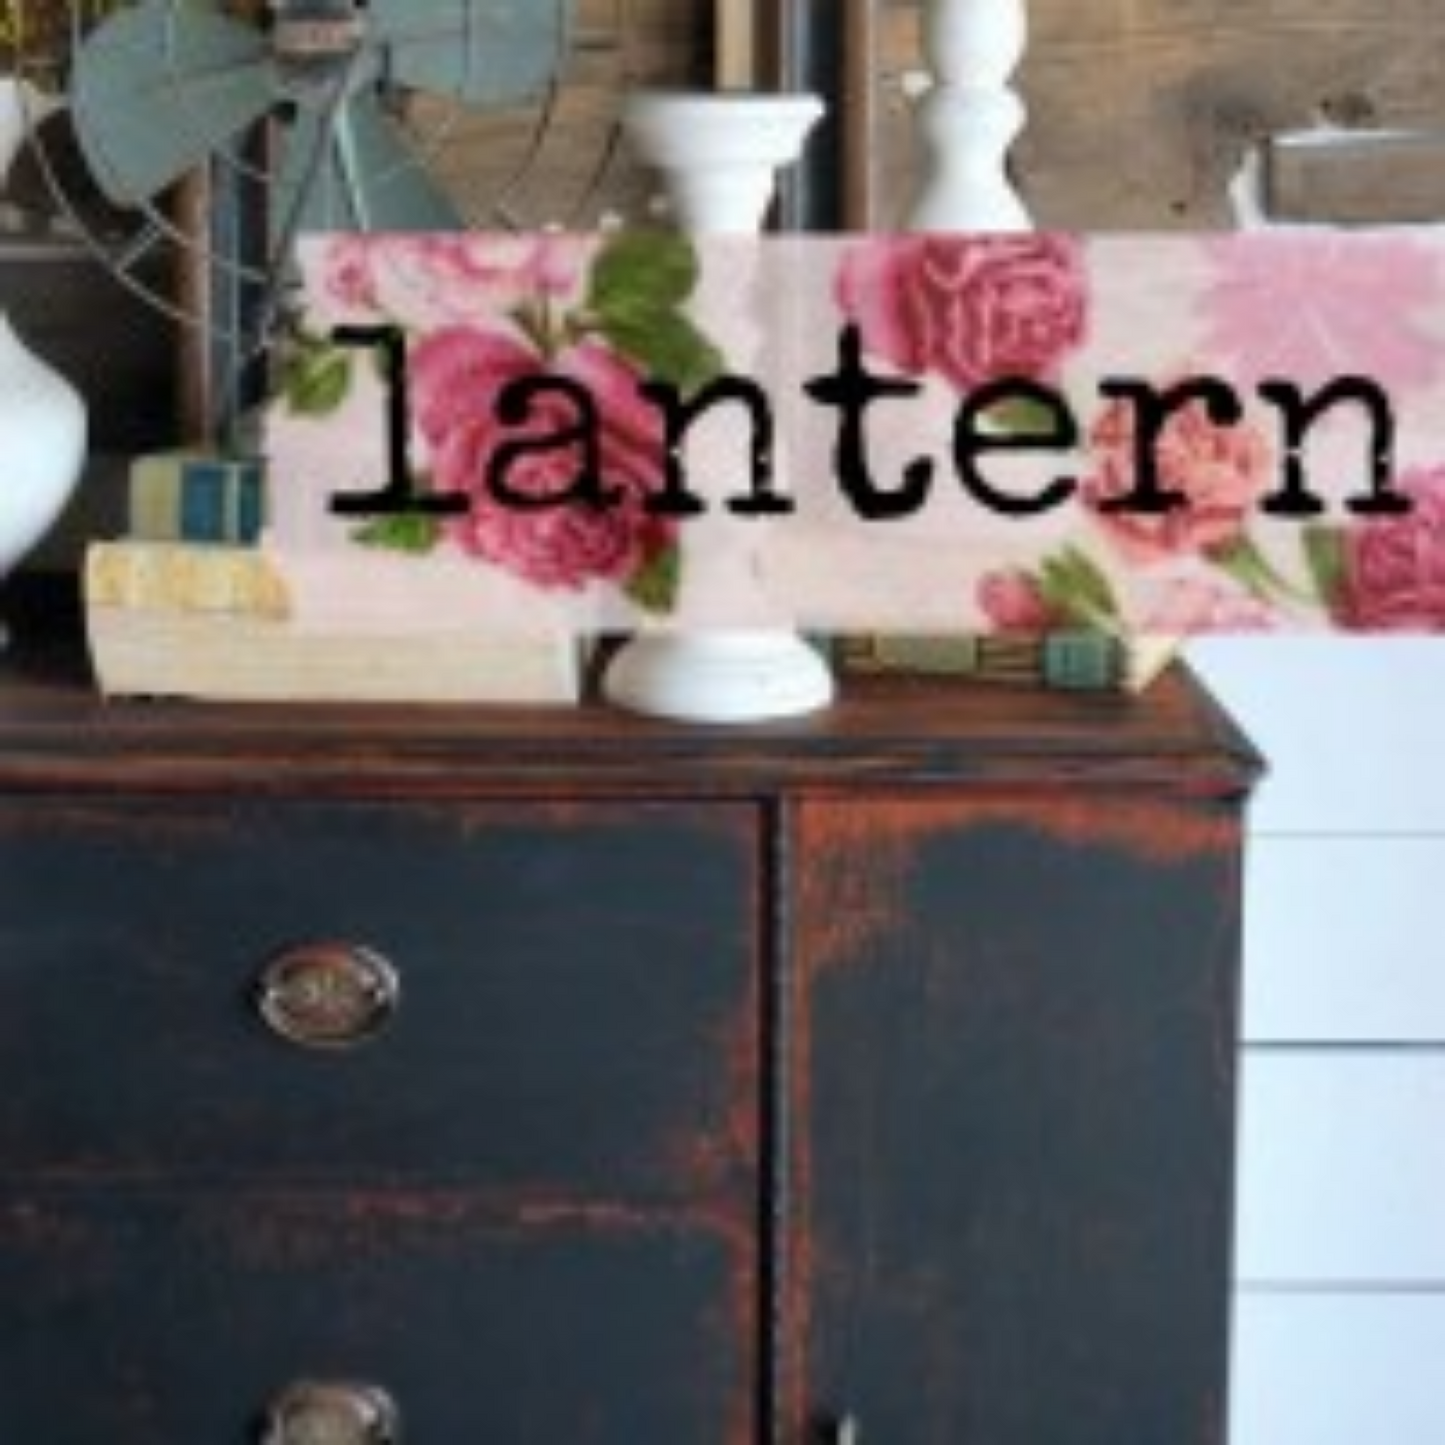 Dresser front painted in Lantern by Sweet Pickins Milk Paint available at Milton's Daughter